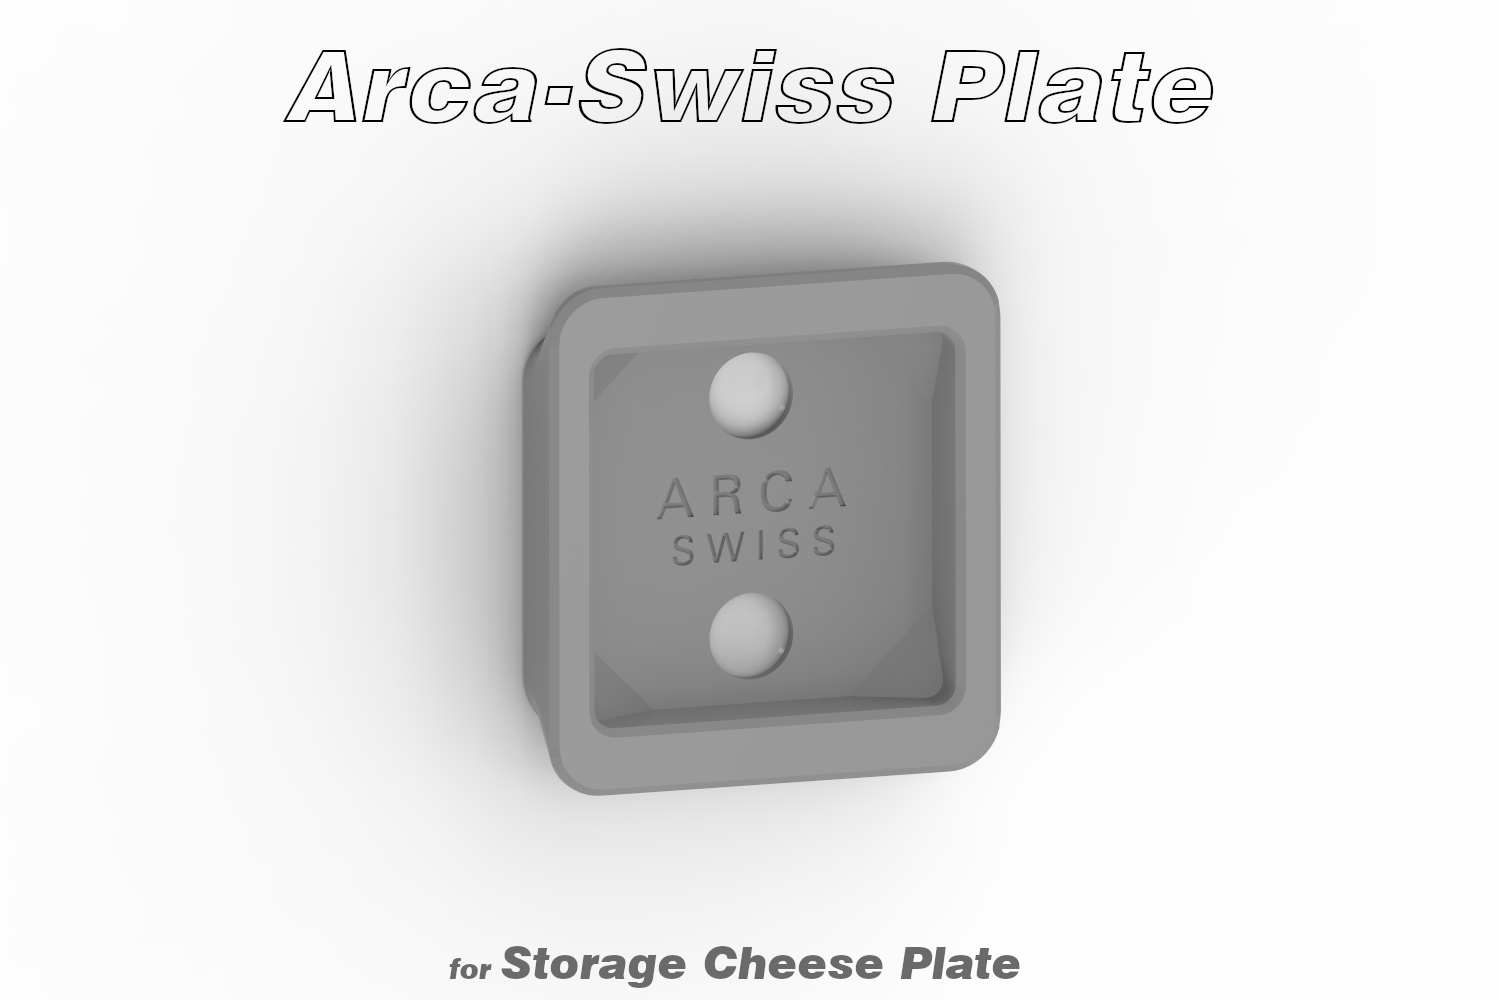 Arca-Swiss Plate (for Storage Cheese Plate)